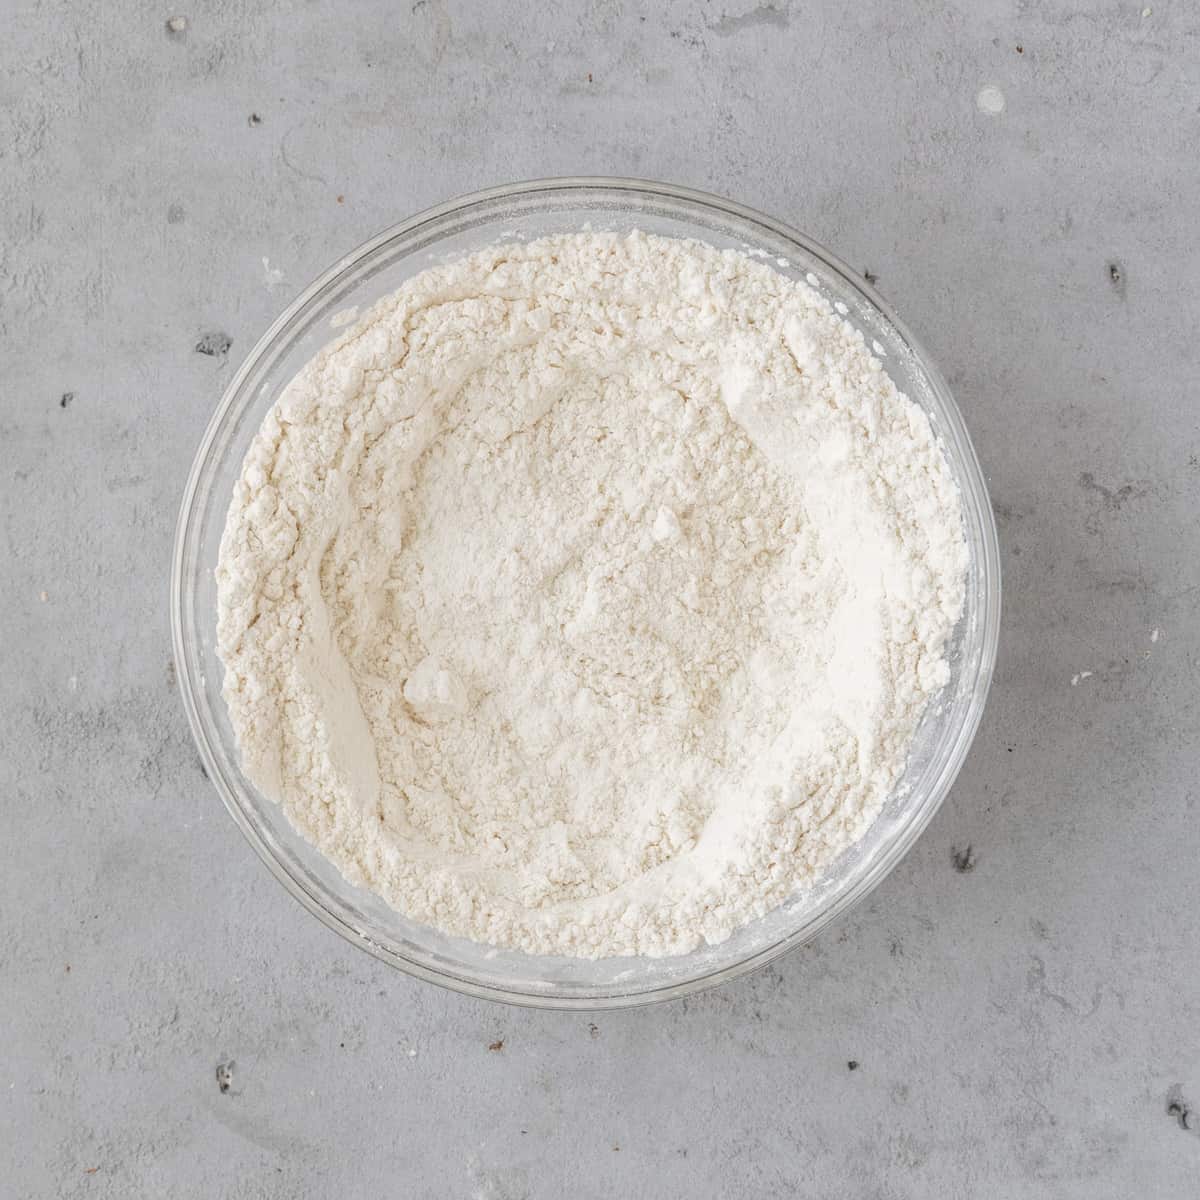 all of the dry ingredients combined in a glass bowl on a grey background